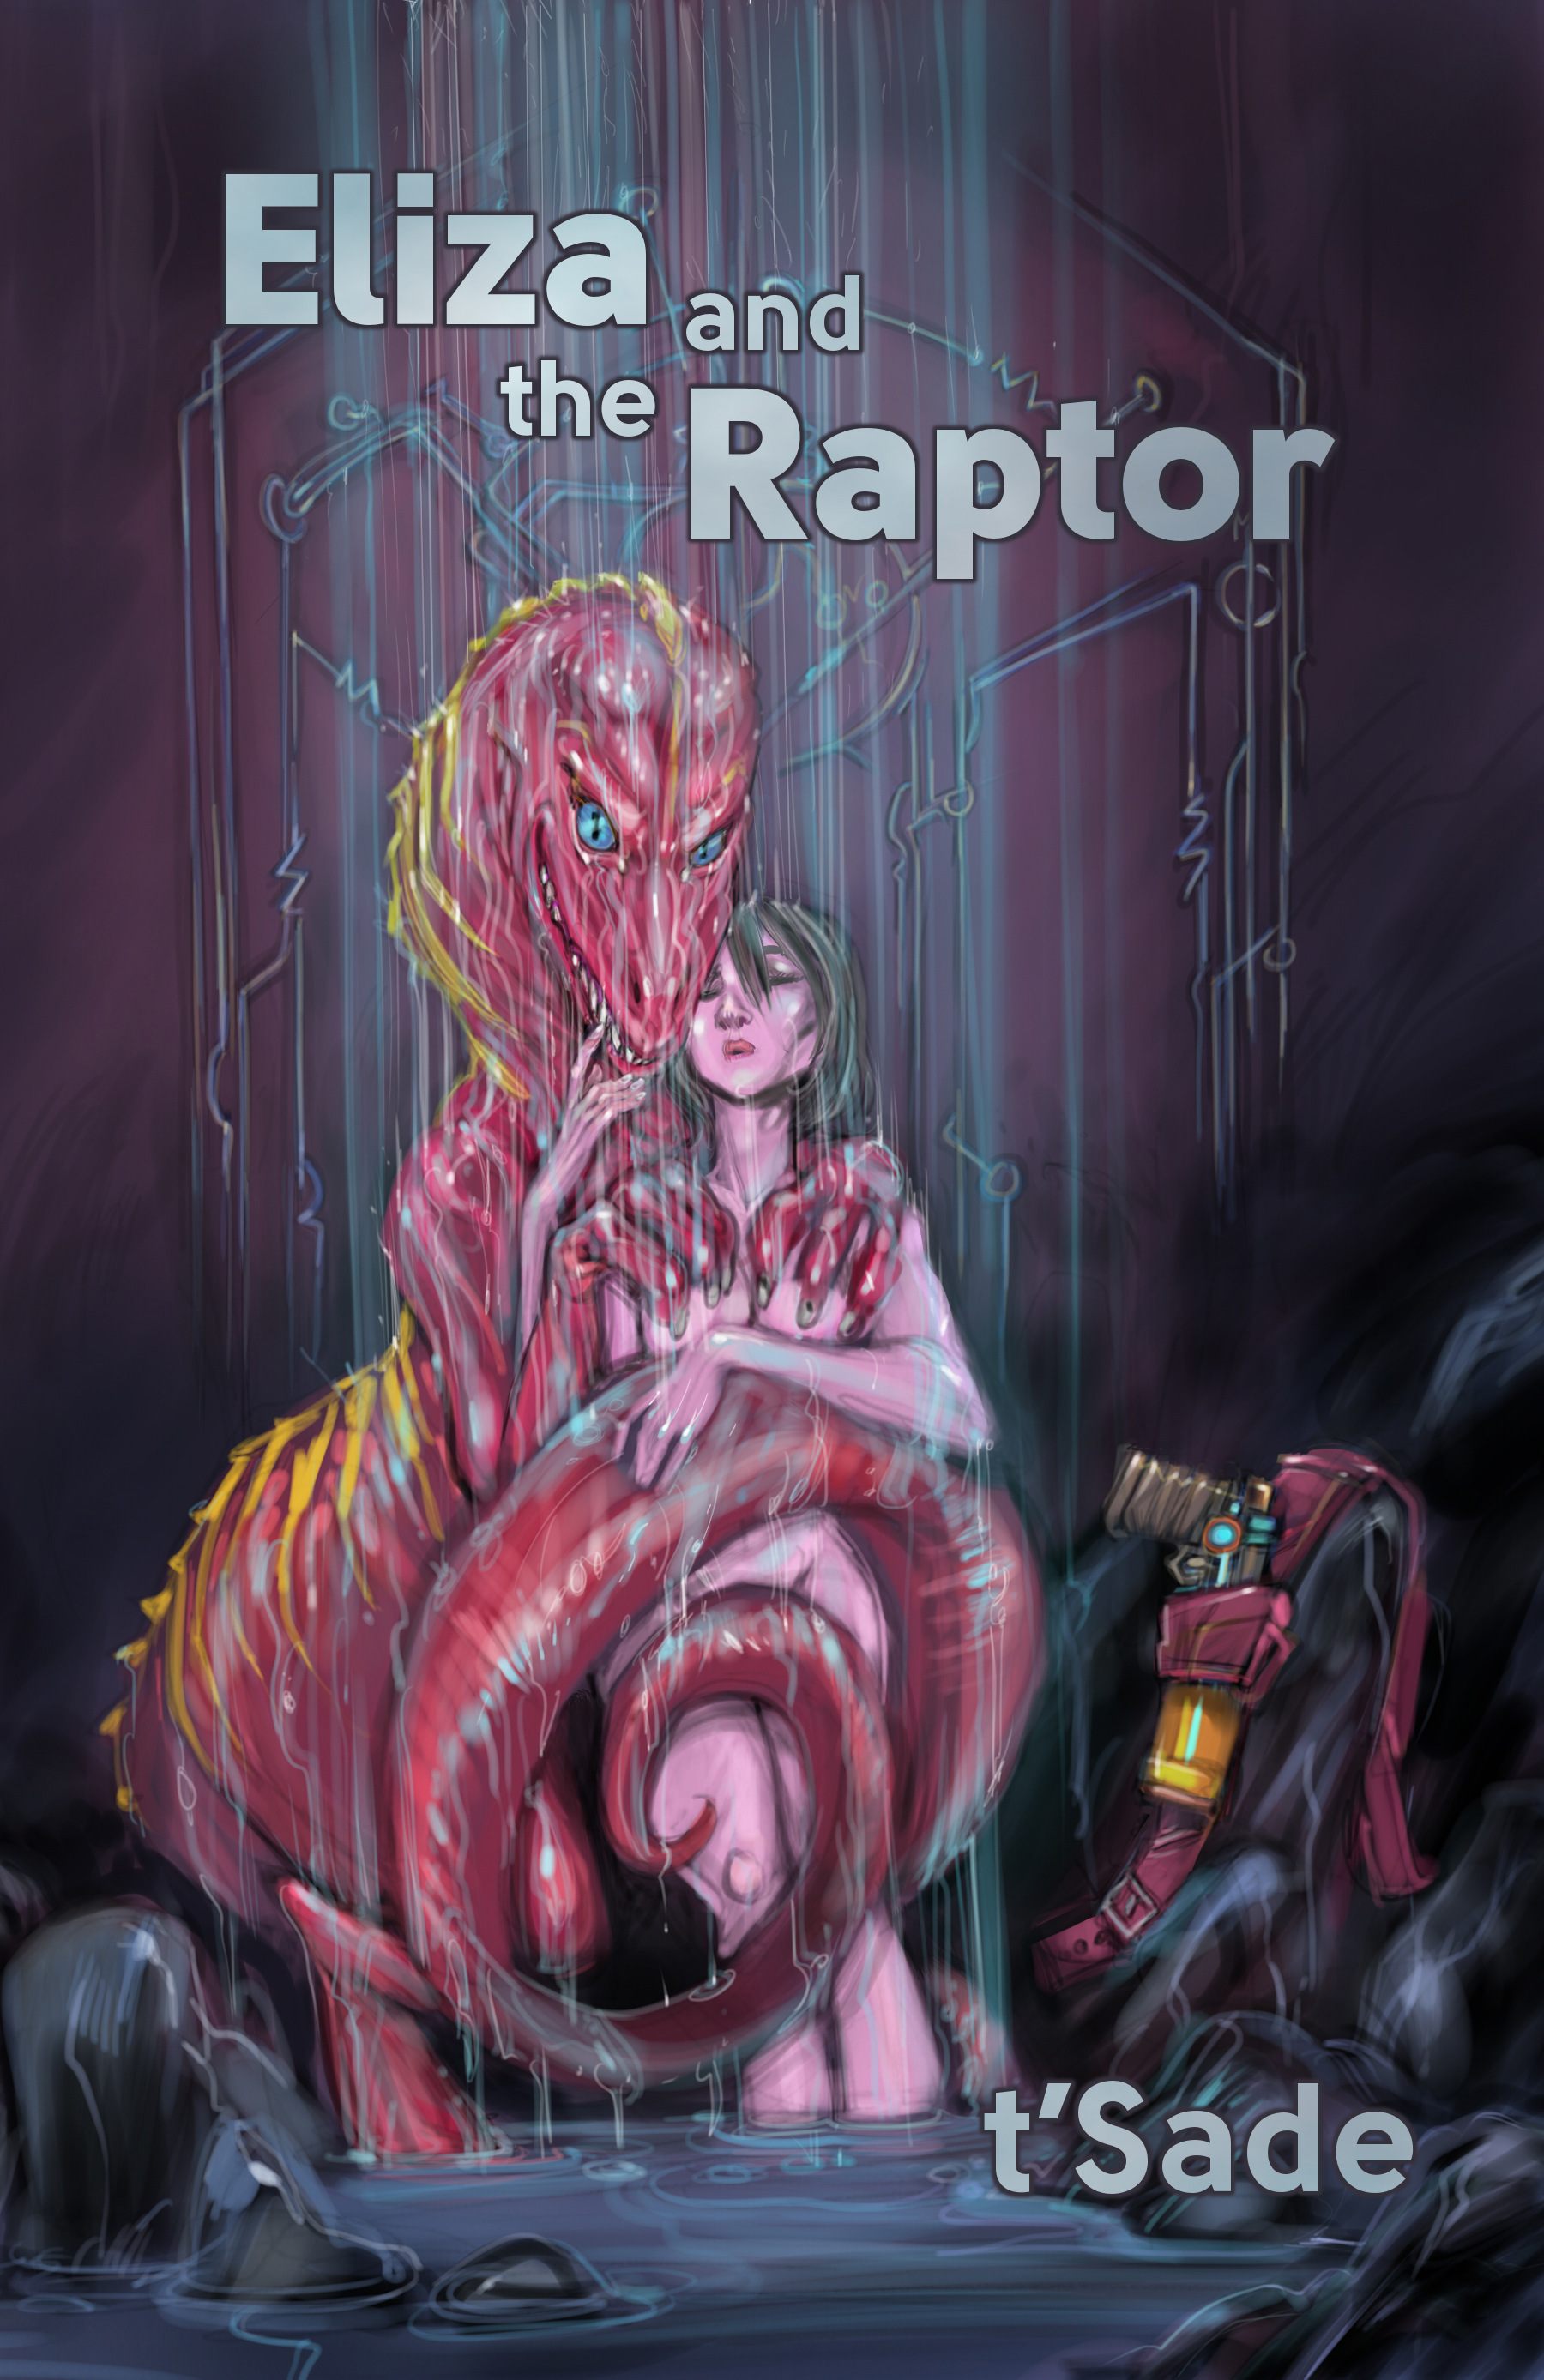 Eliza and the Raptor